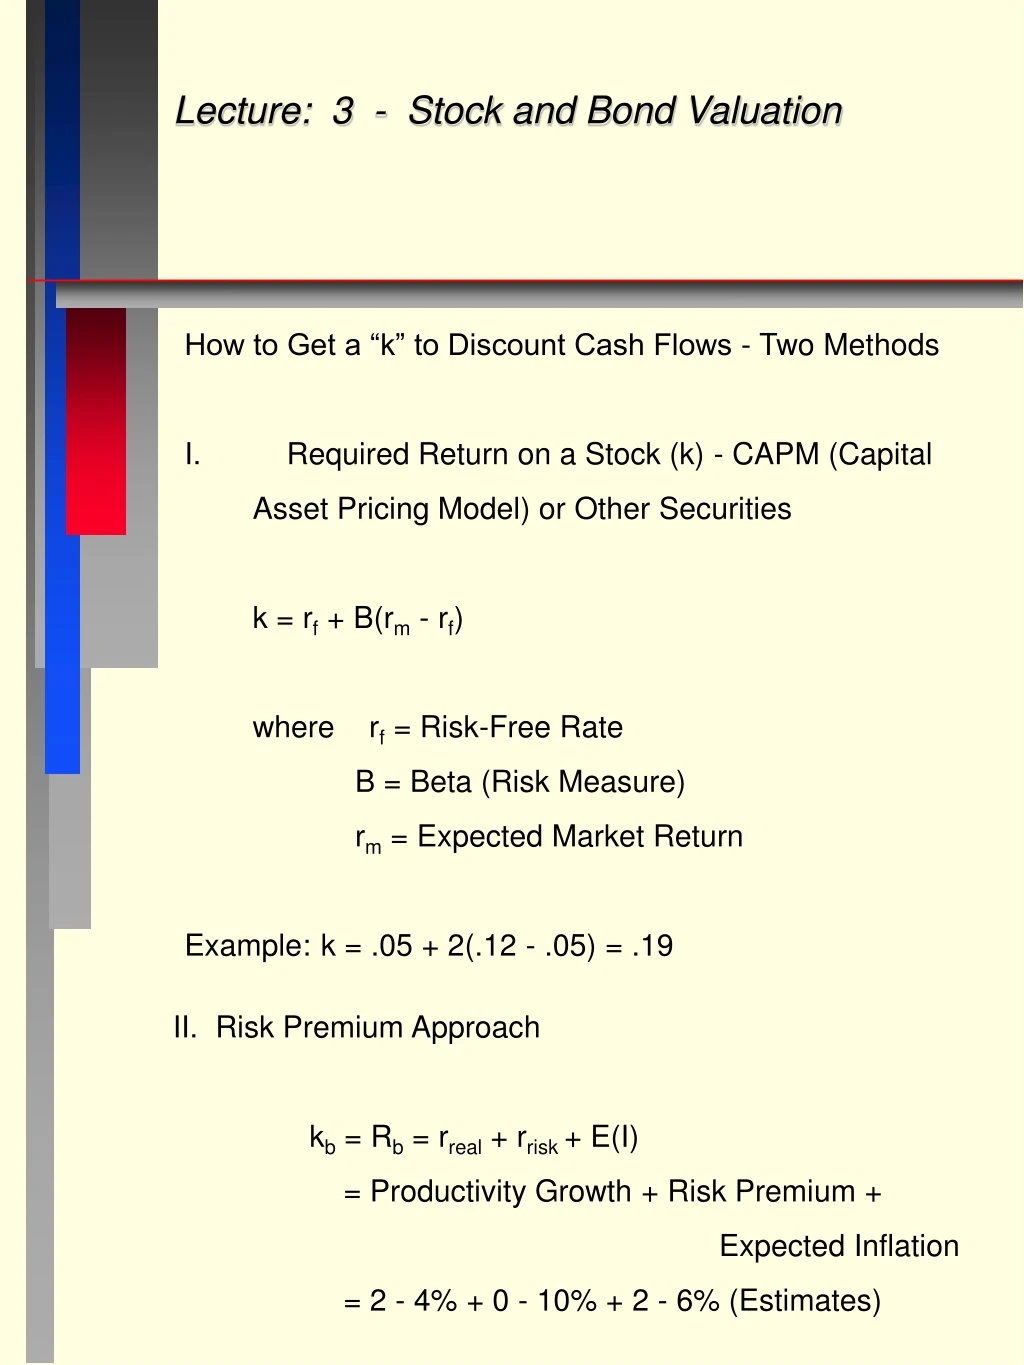 lecture 3 stock and bond valuation